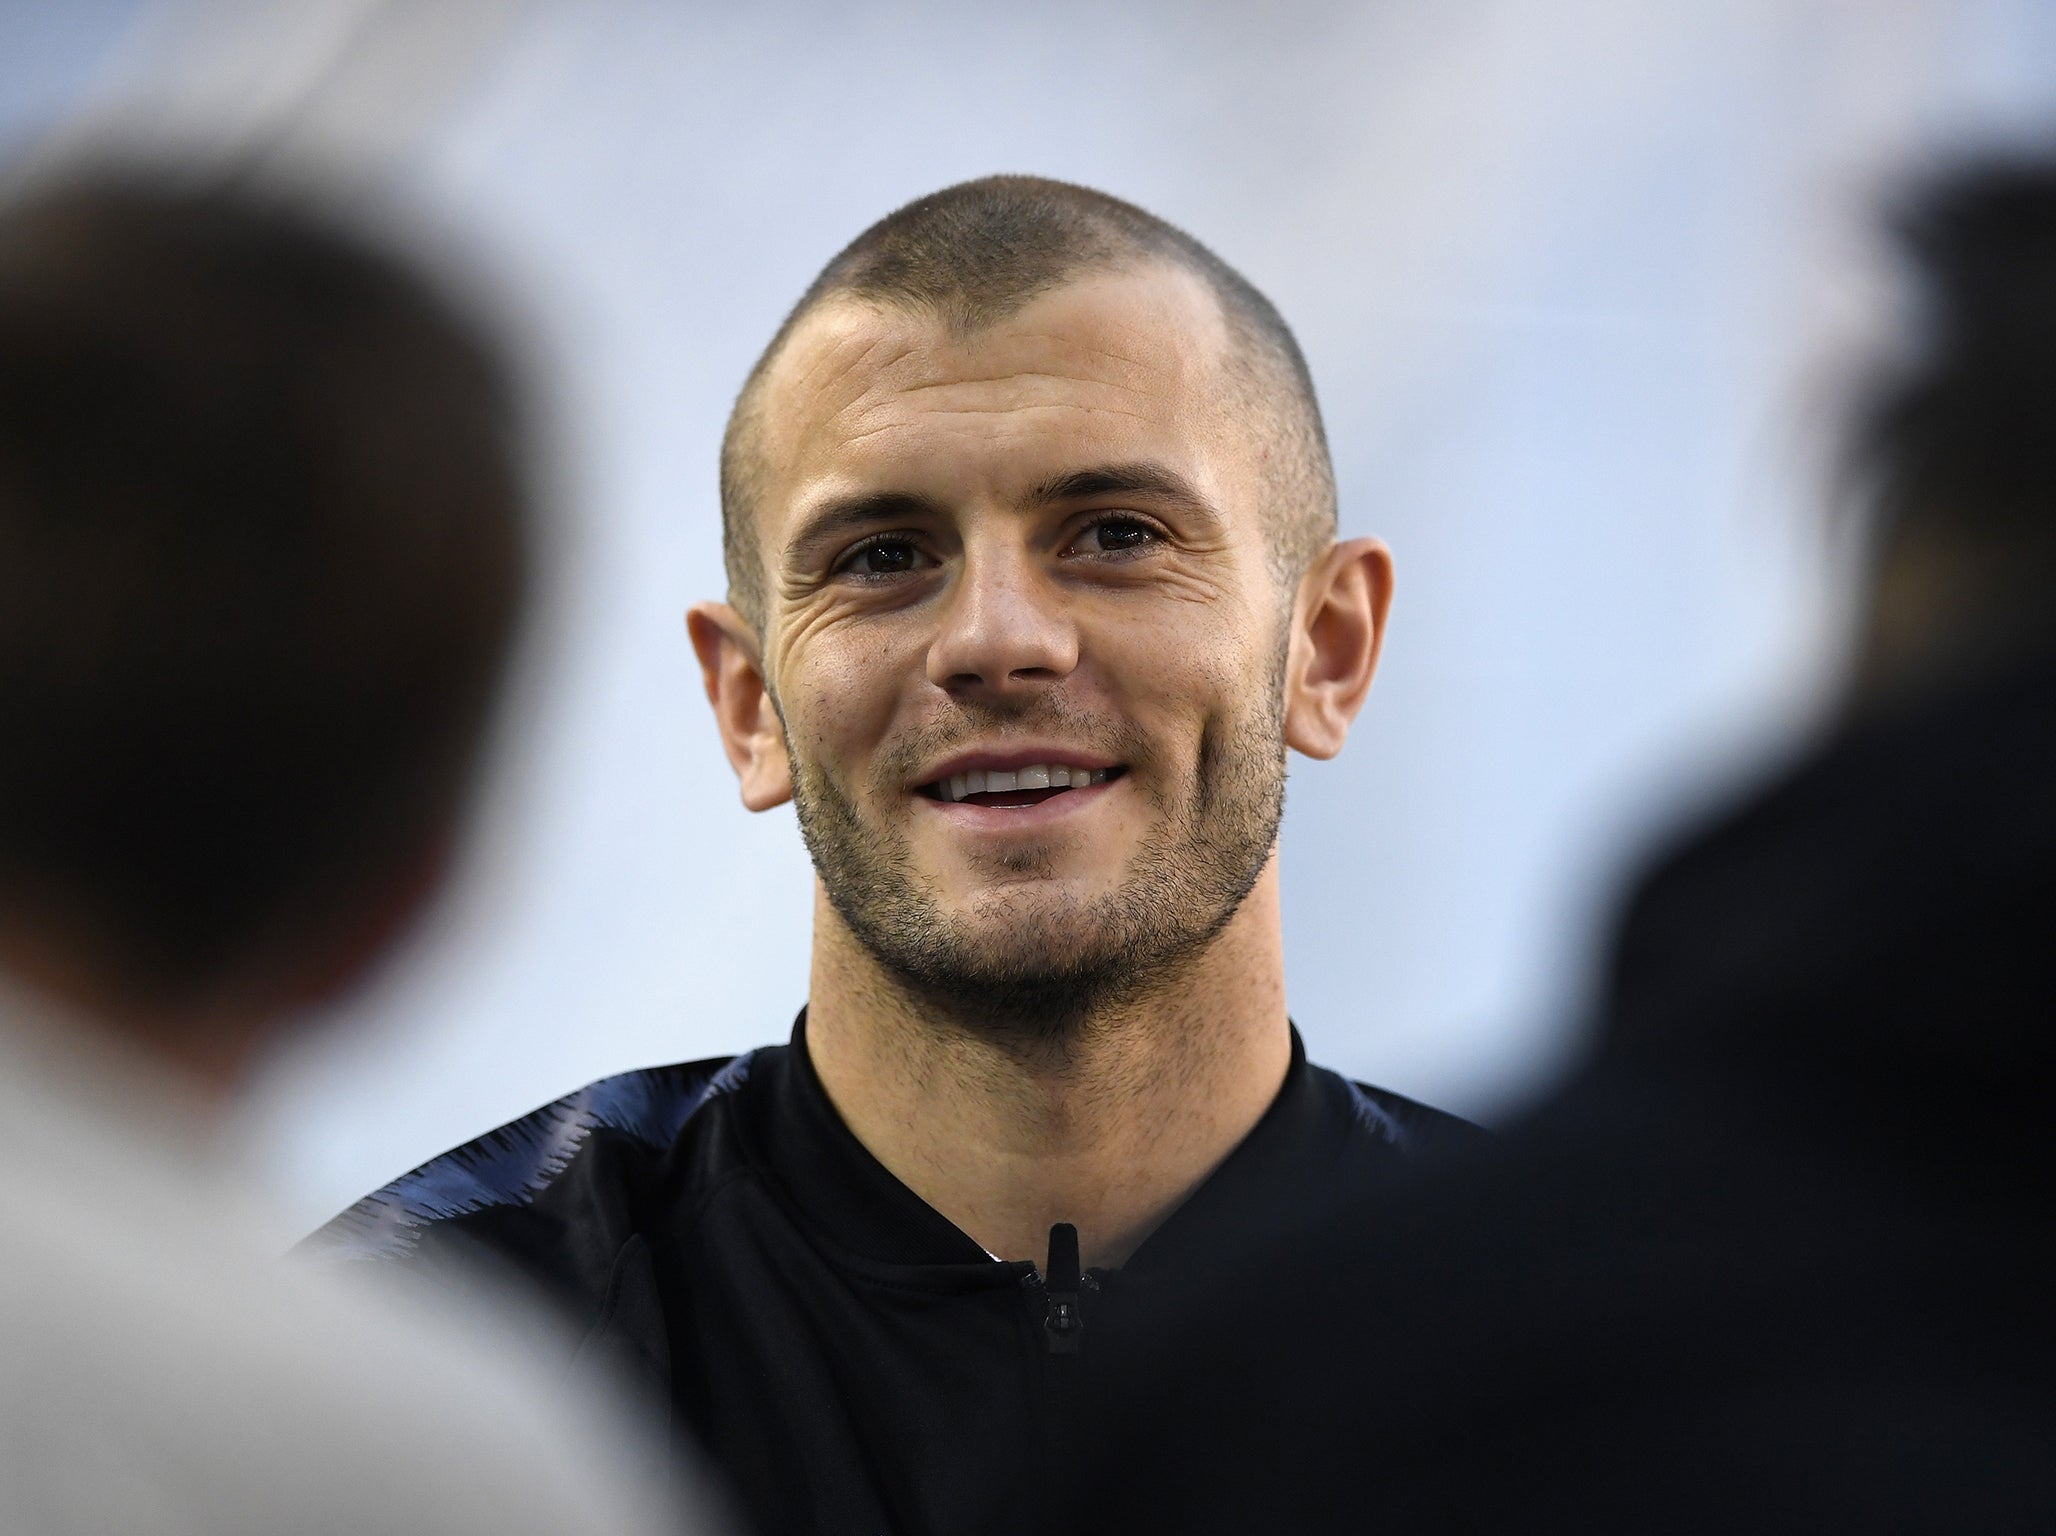 Jack Wilshere is back in the England squad